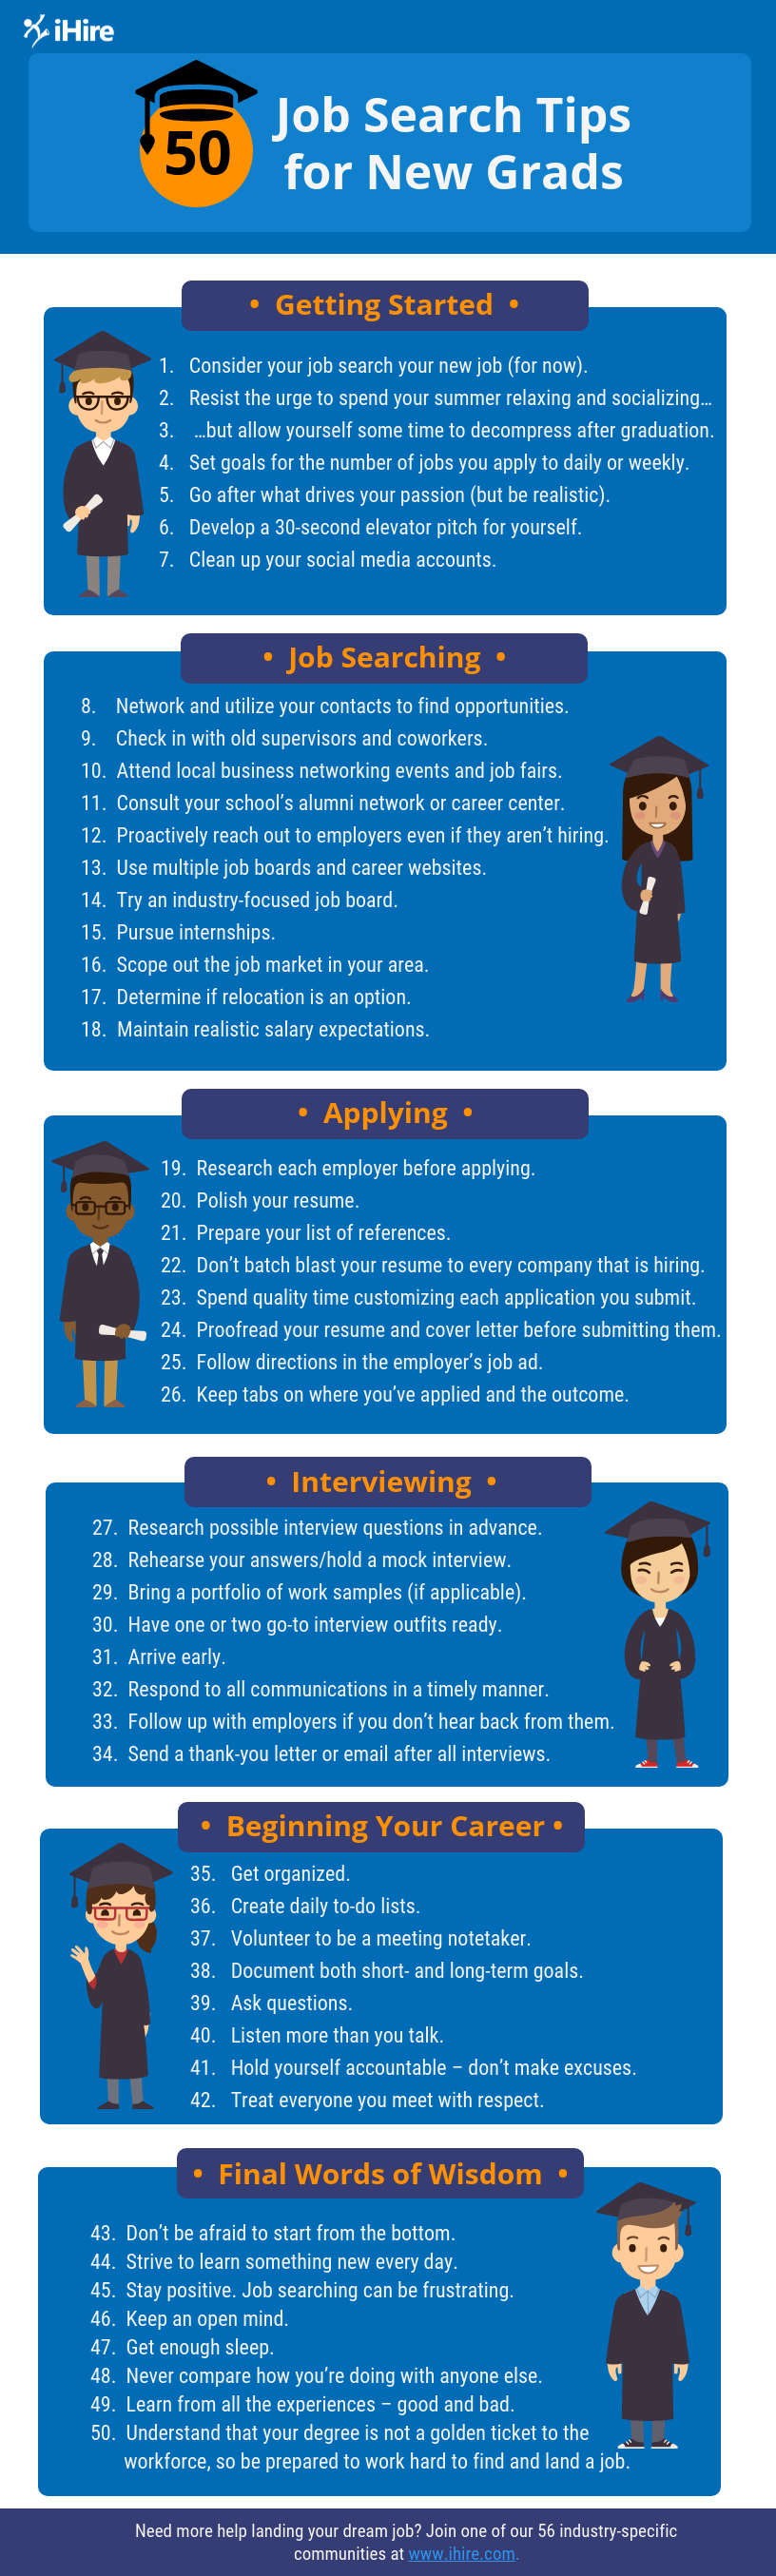 job search cheat sheet for new grads